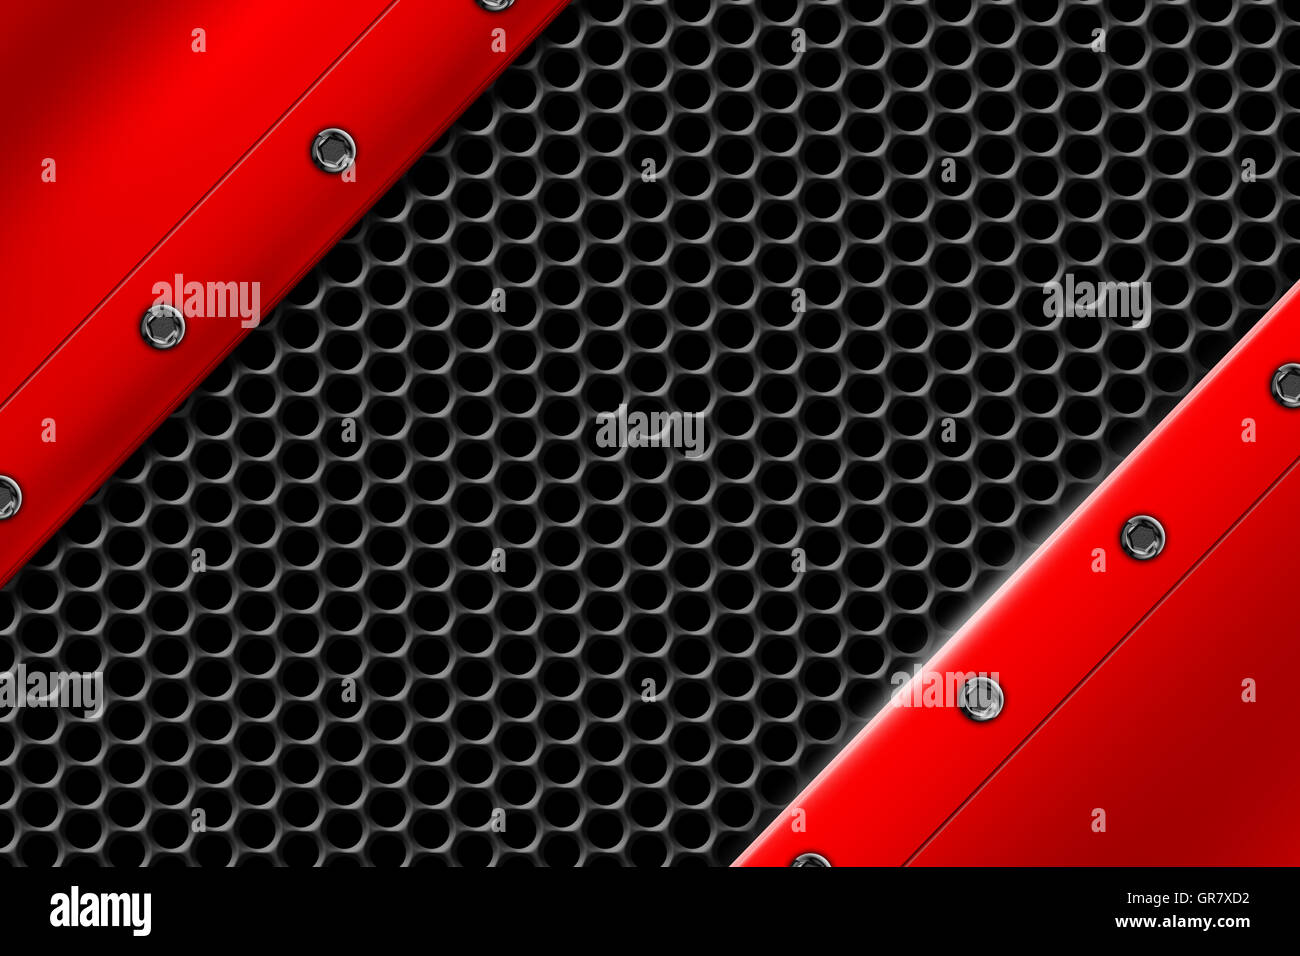 red metal background with rivet on gray metallic mesh. background and texture 3d illustration. Stock Photo